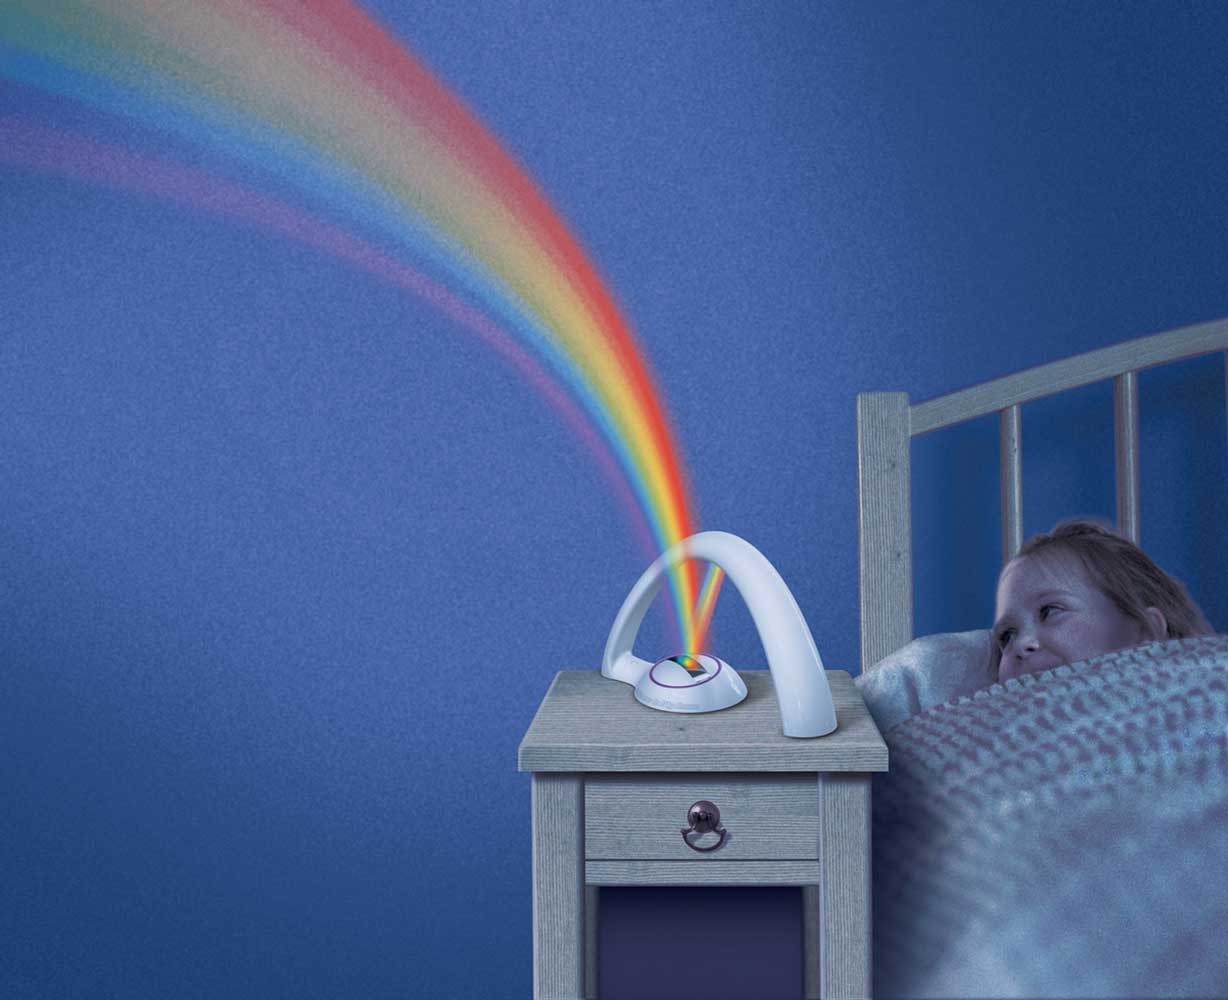 Rainbow_in_My_Room_with_Girl_New_Hi_Res.jpg